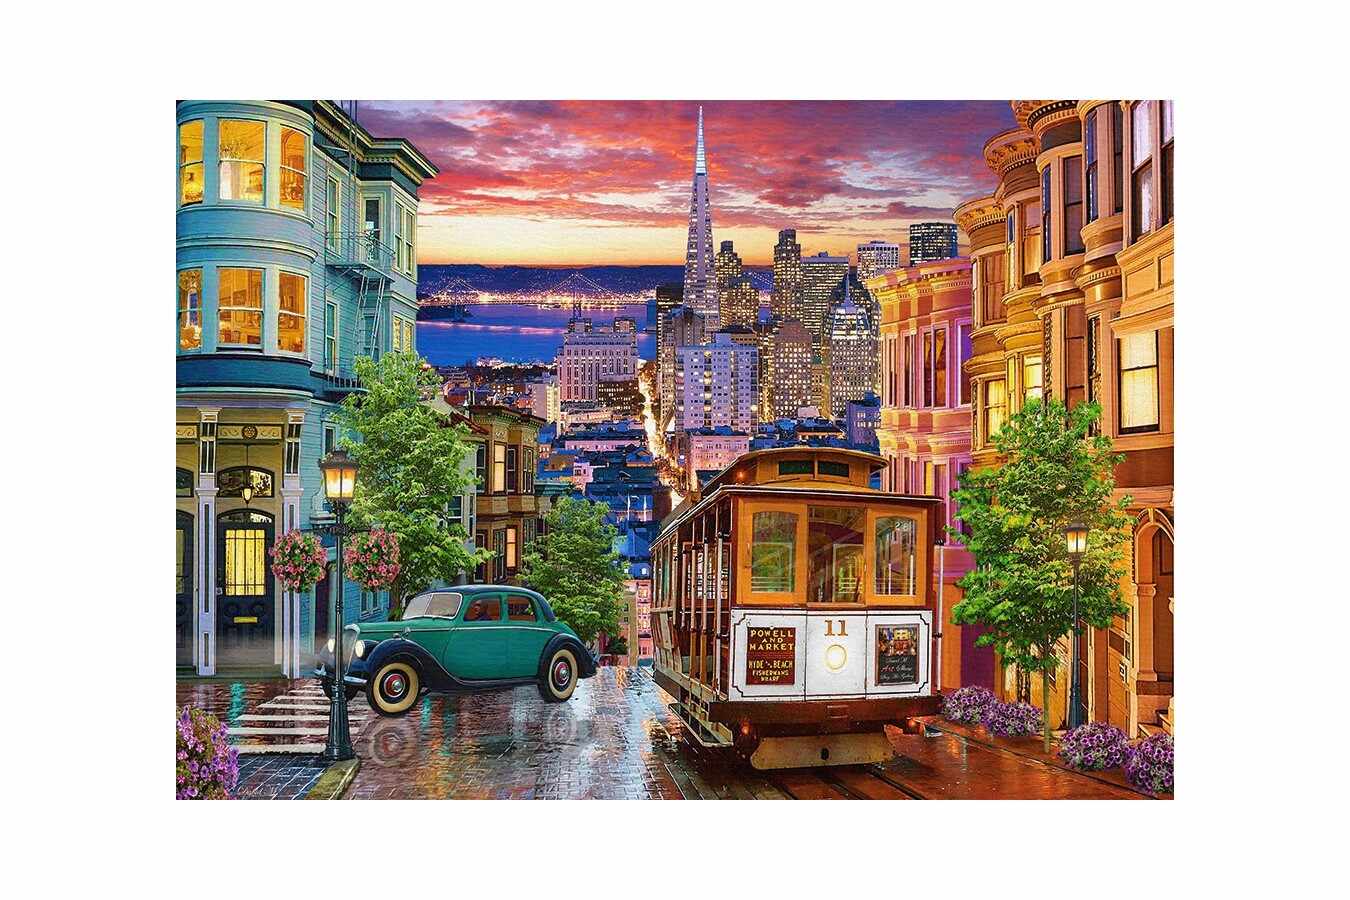 Puzzle Castorland - San Francisco Trolley, 500 piese (53391)